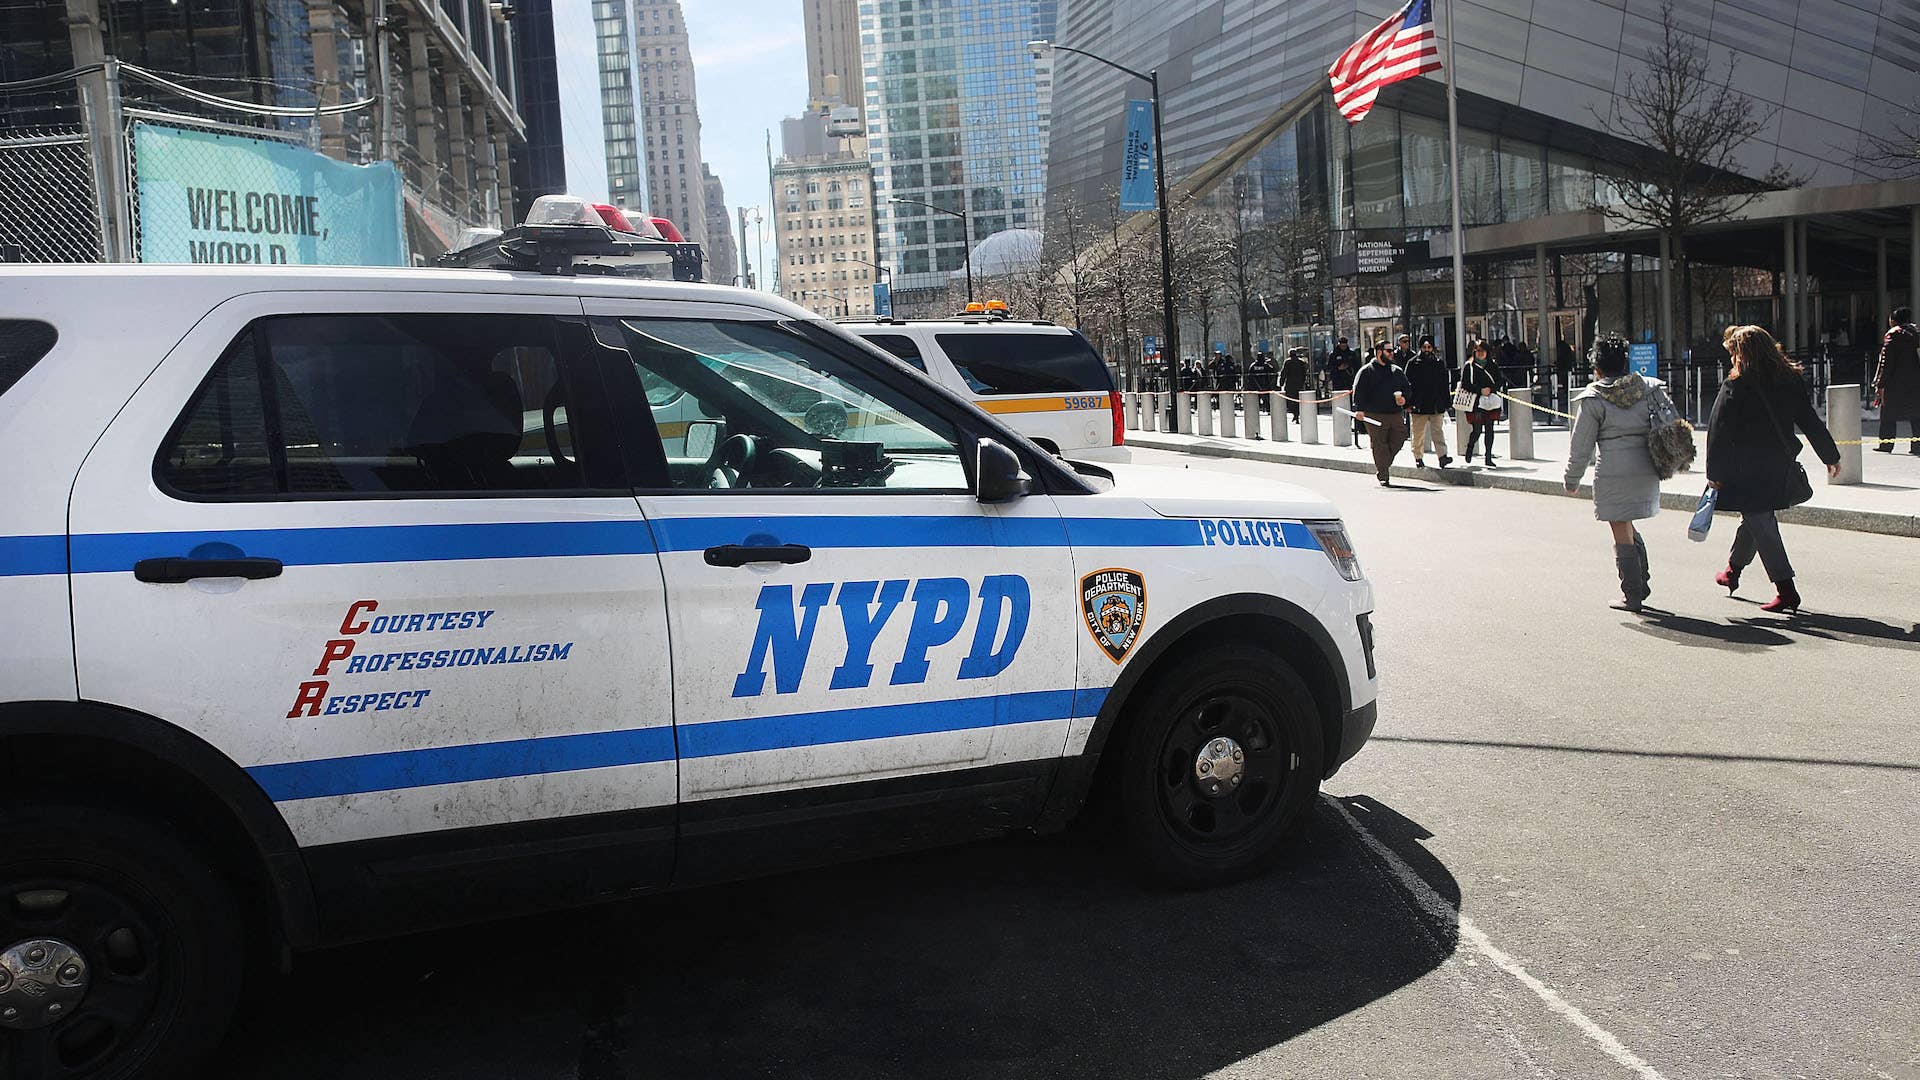 NYPD patrol car photographed in New York City